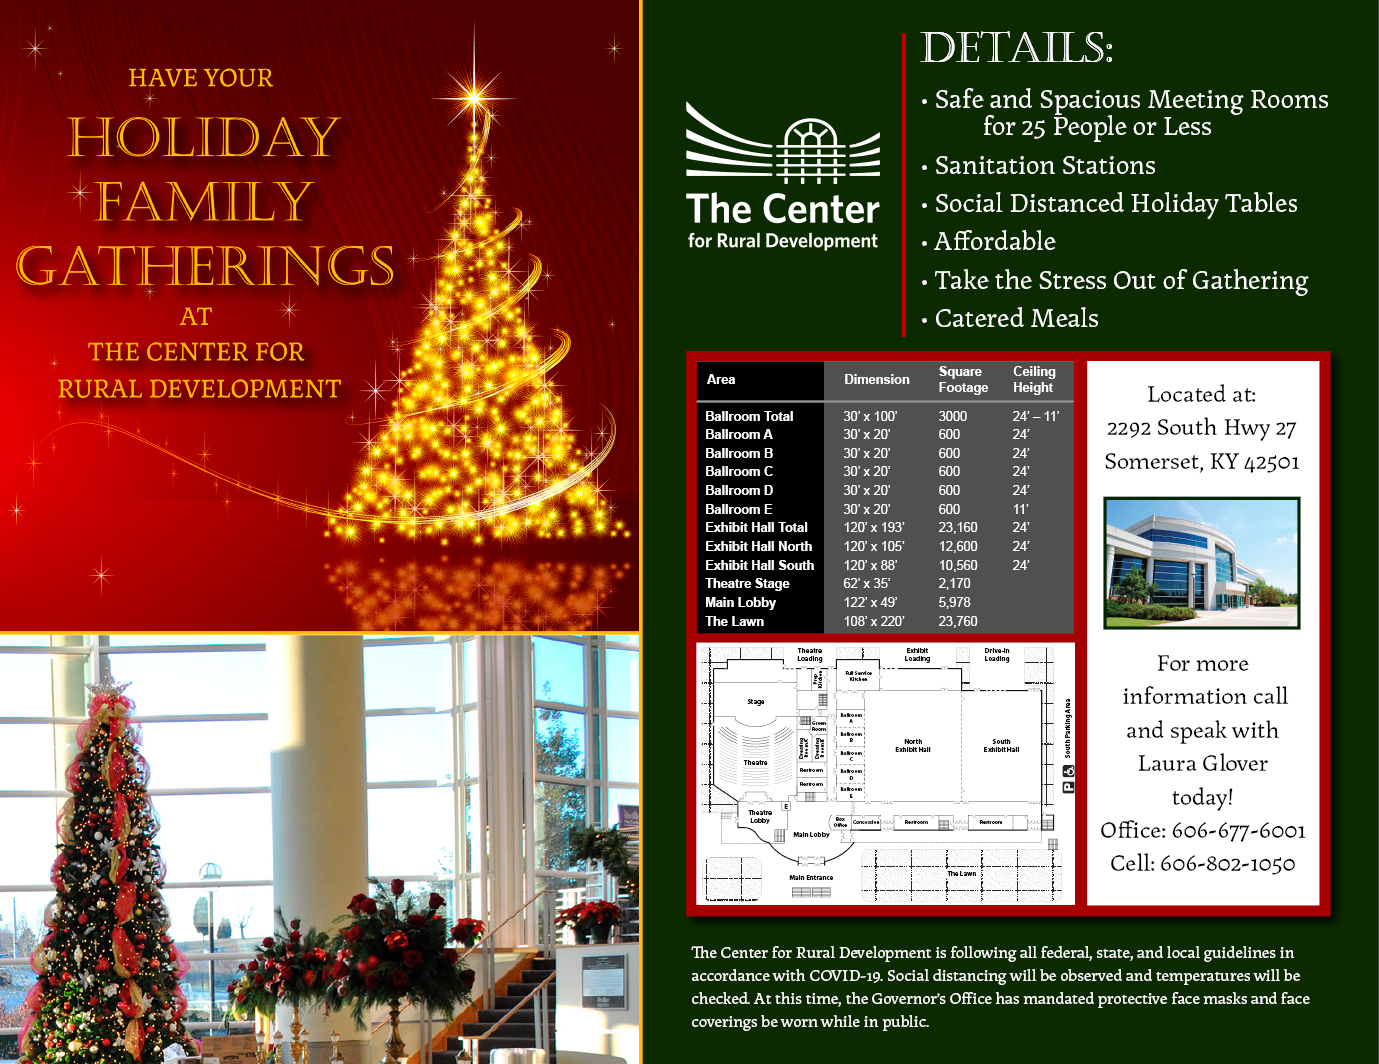 Have Your Holiday Family Gathering at The Center